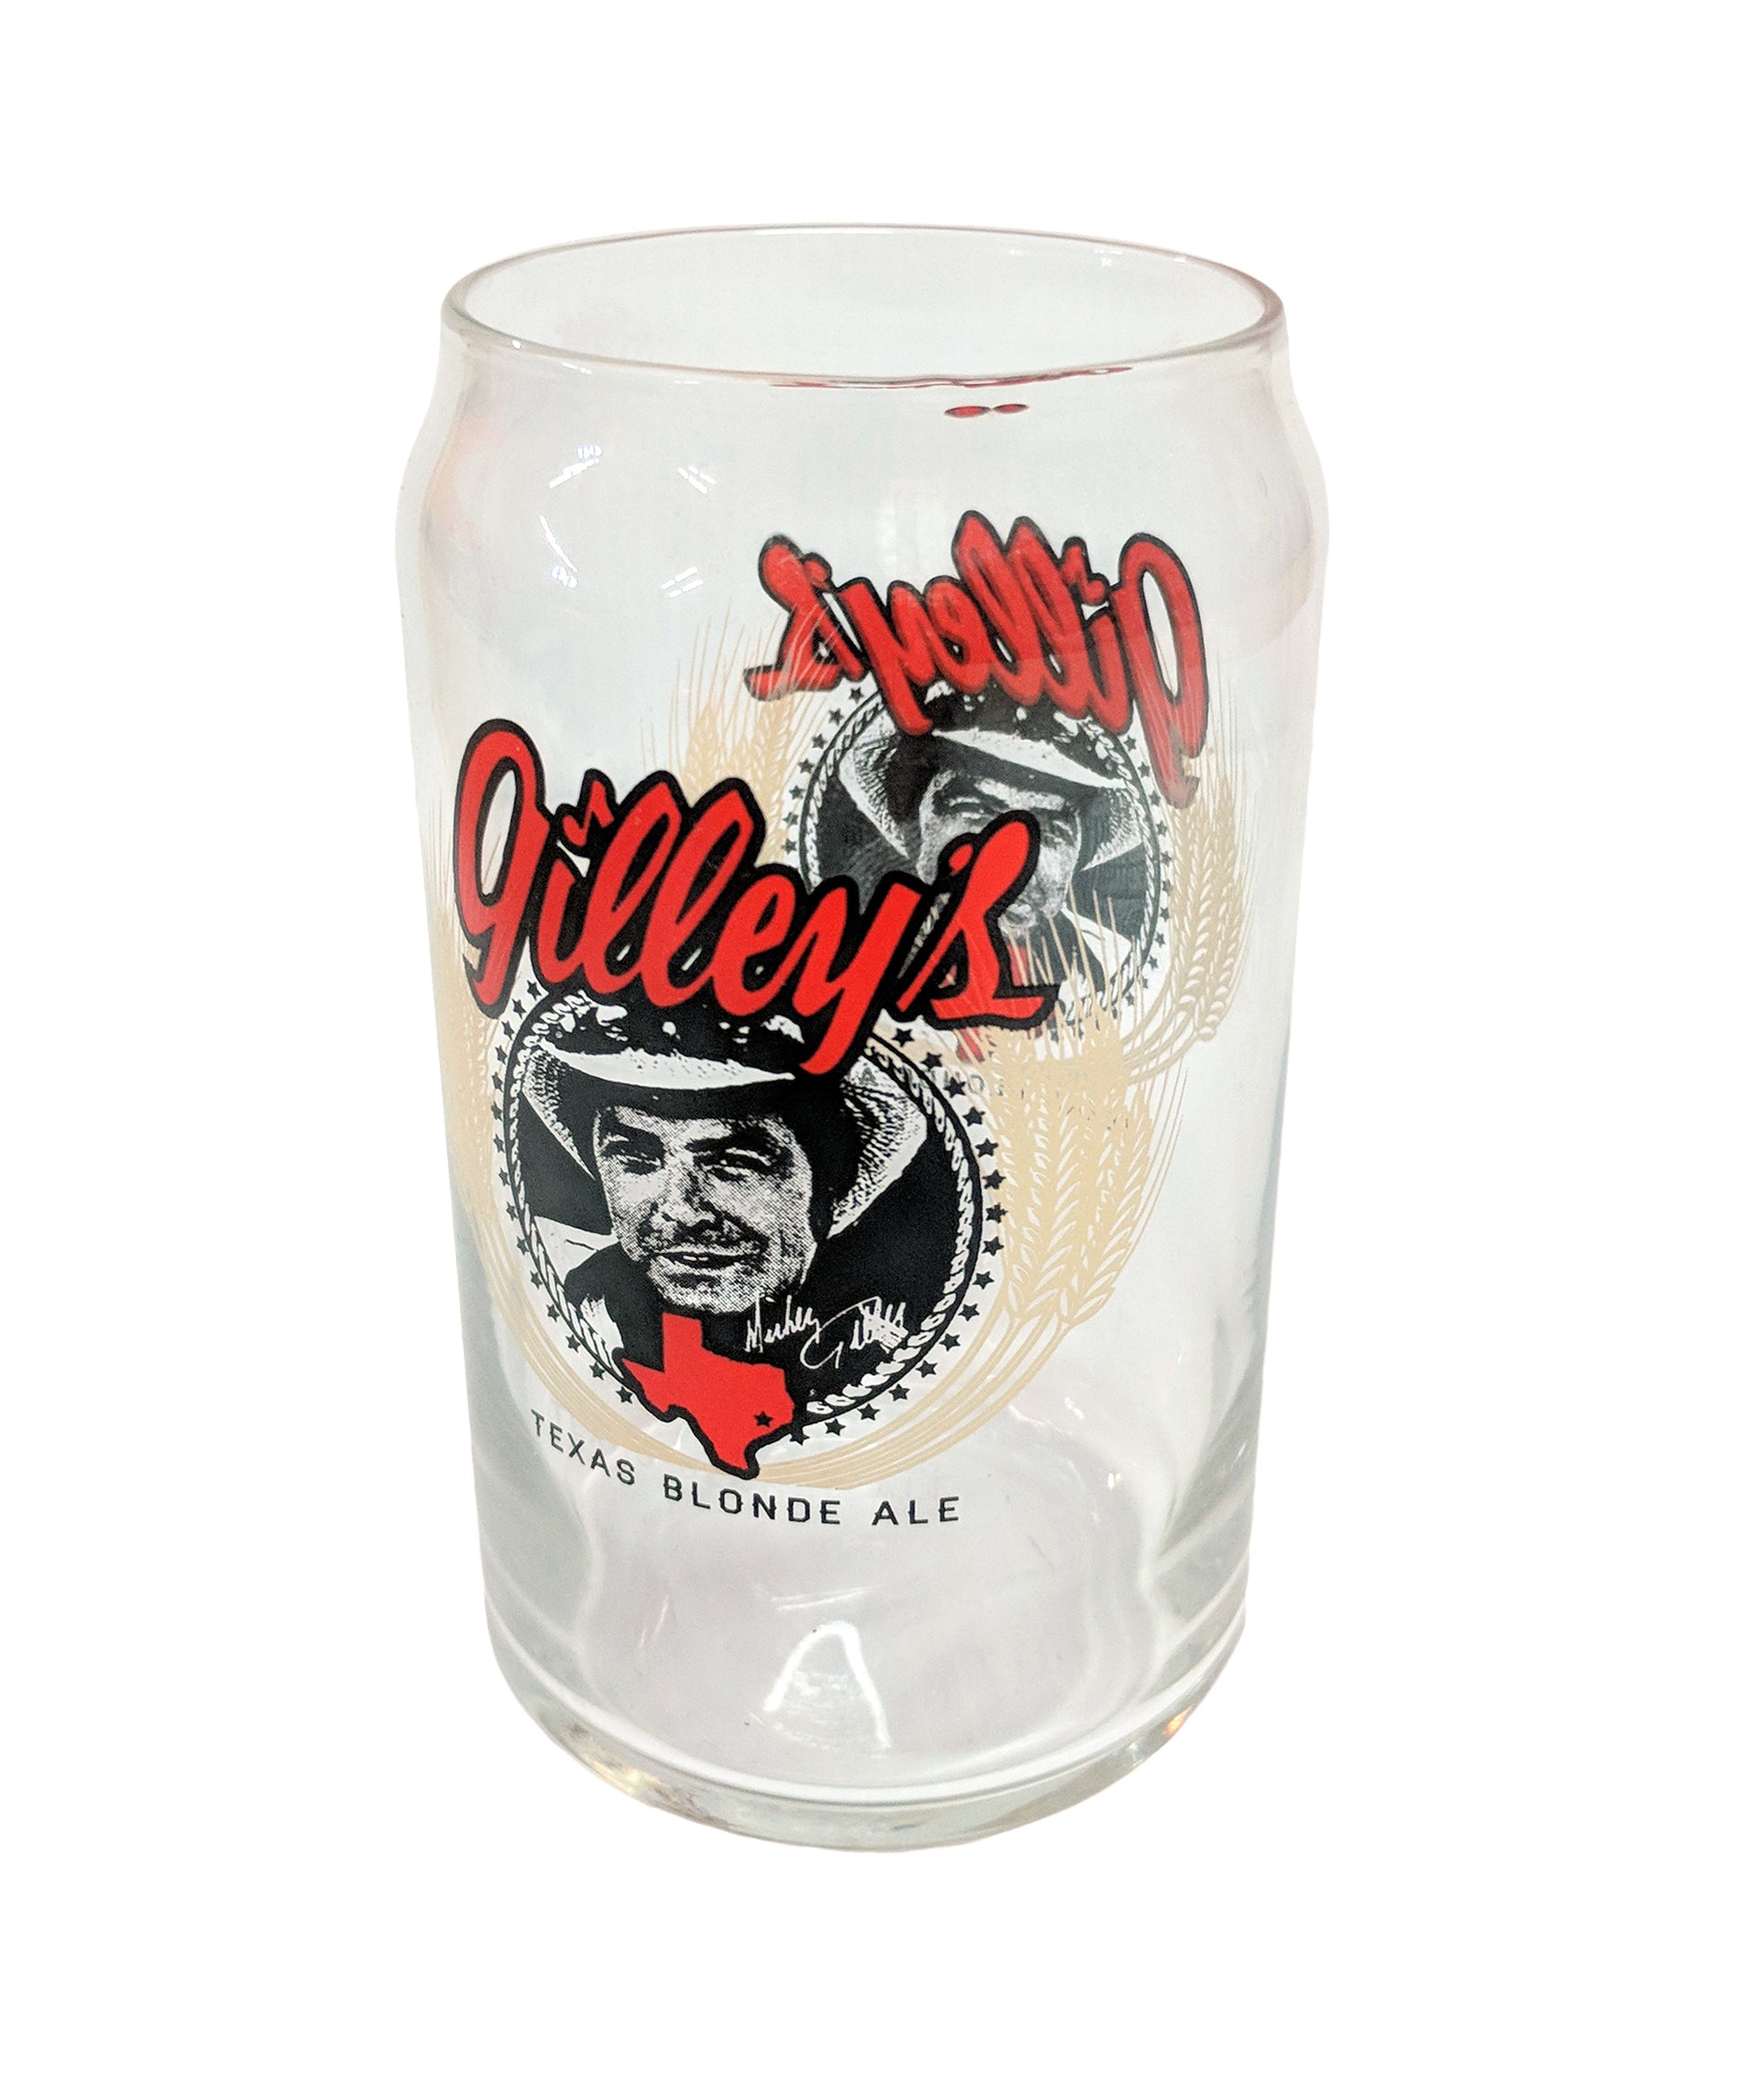 Gilley's beer can glass